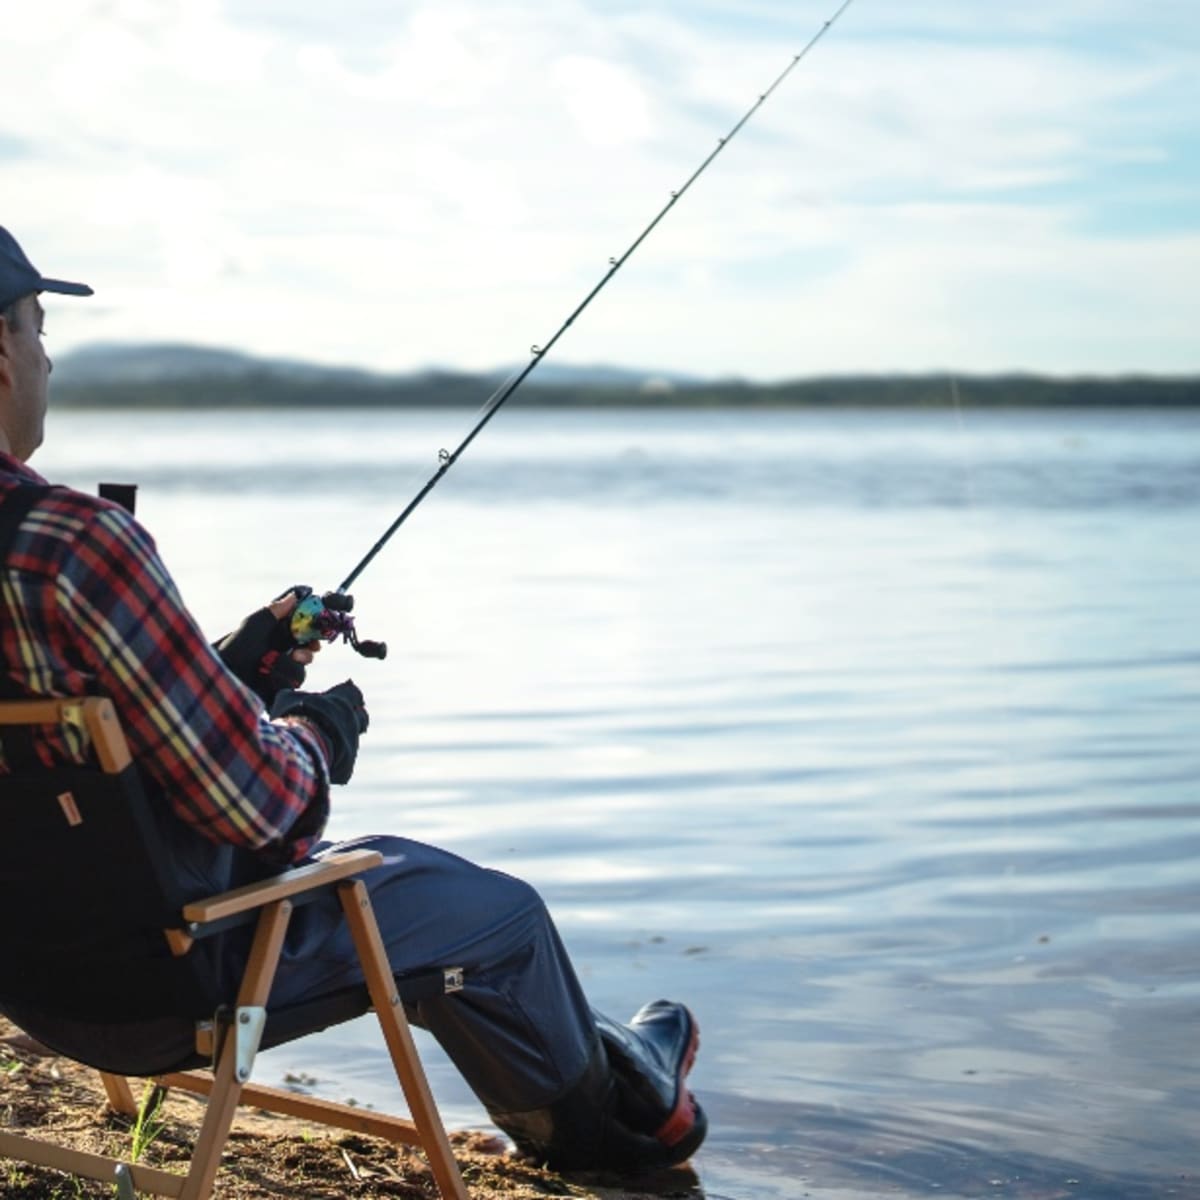 Fishing Is Good for Men's Mental Health, British Study Finds - Men's